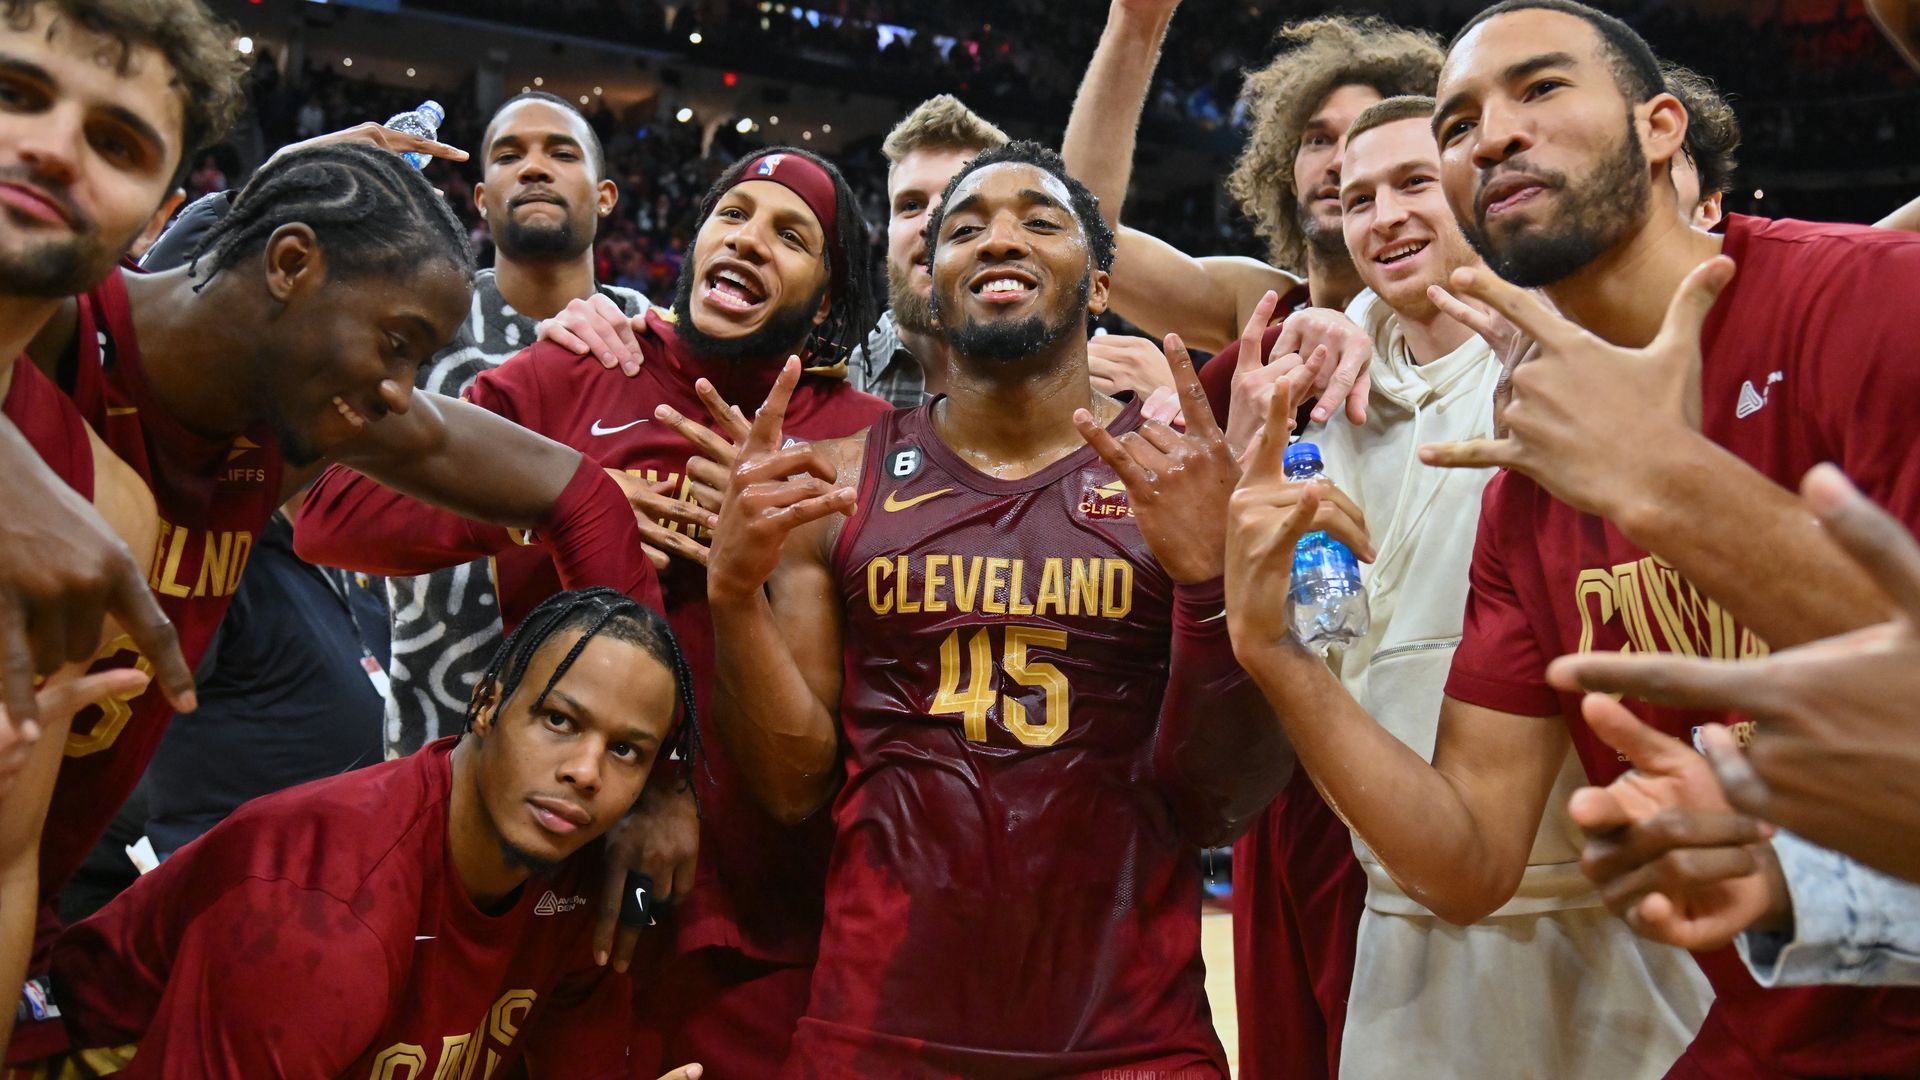 Cavs have turned Cleveland into one big block party